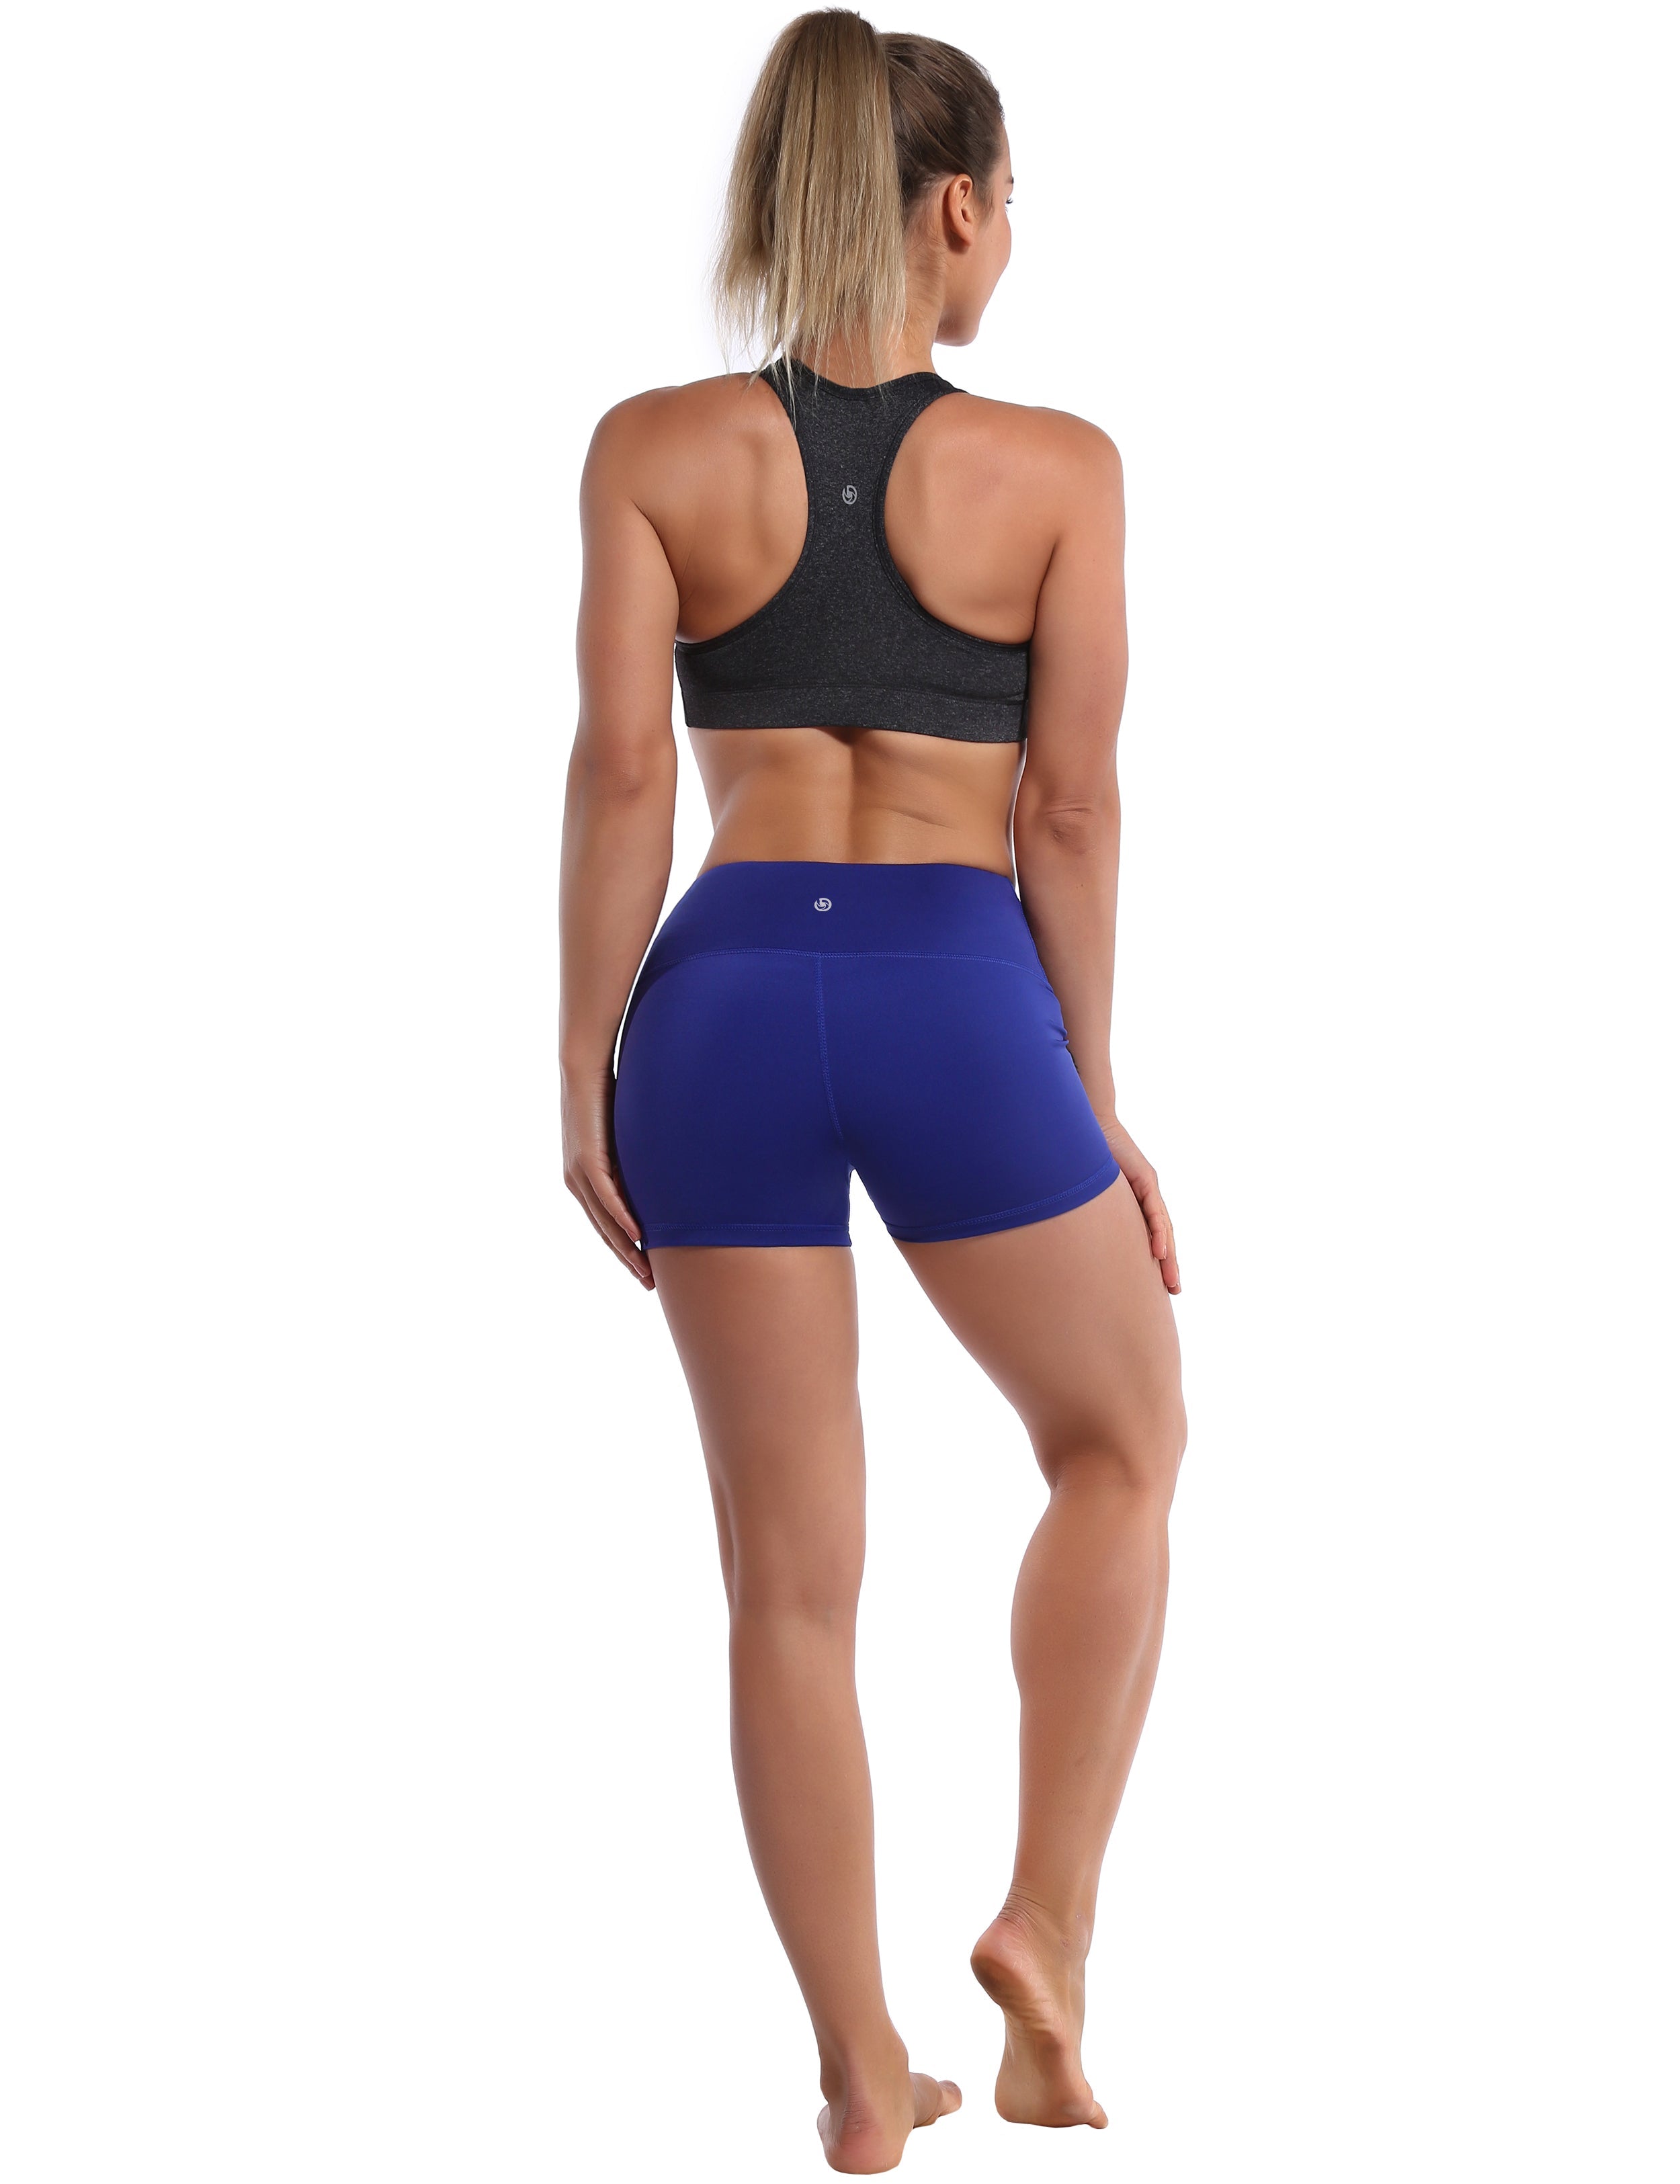 2.5" Jogging Shorts navy Softest-ever fabric High elasticity High density 4-way stretch Fabric doesn't attract lint easily No see-through Moisture-wicking Machine wash 75% Nylon, 25% Spandex